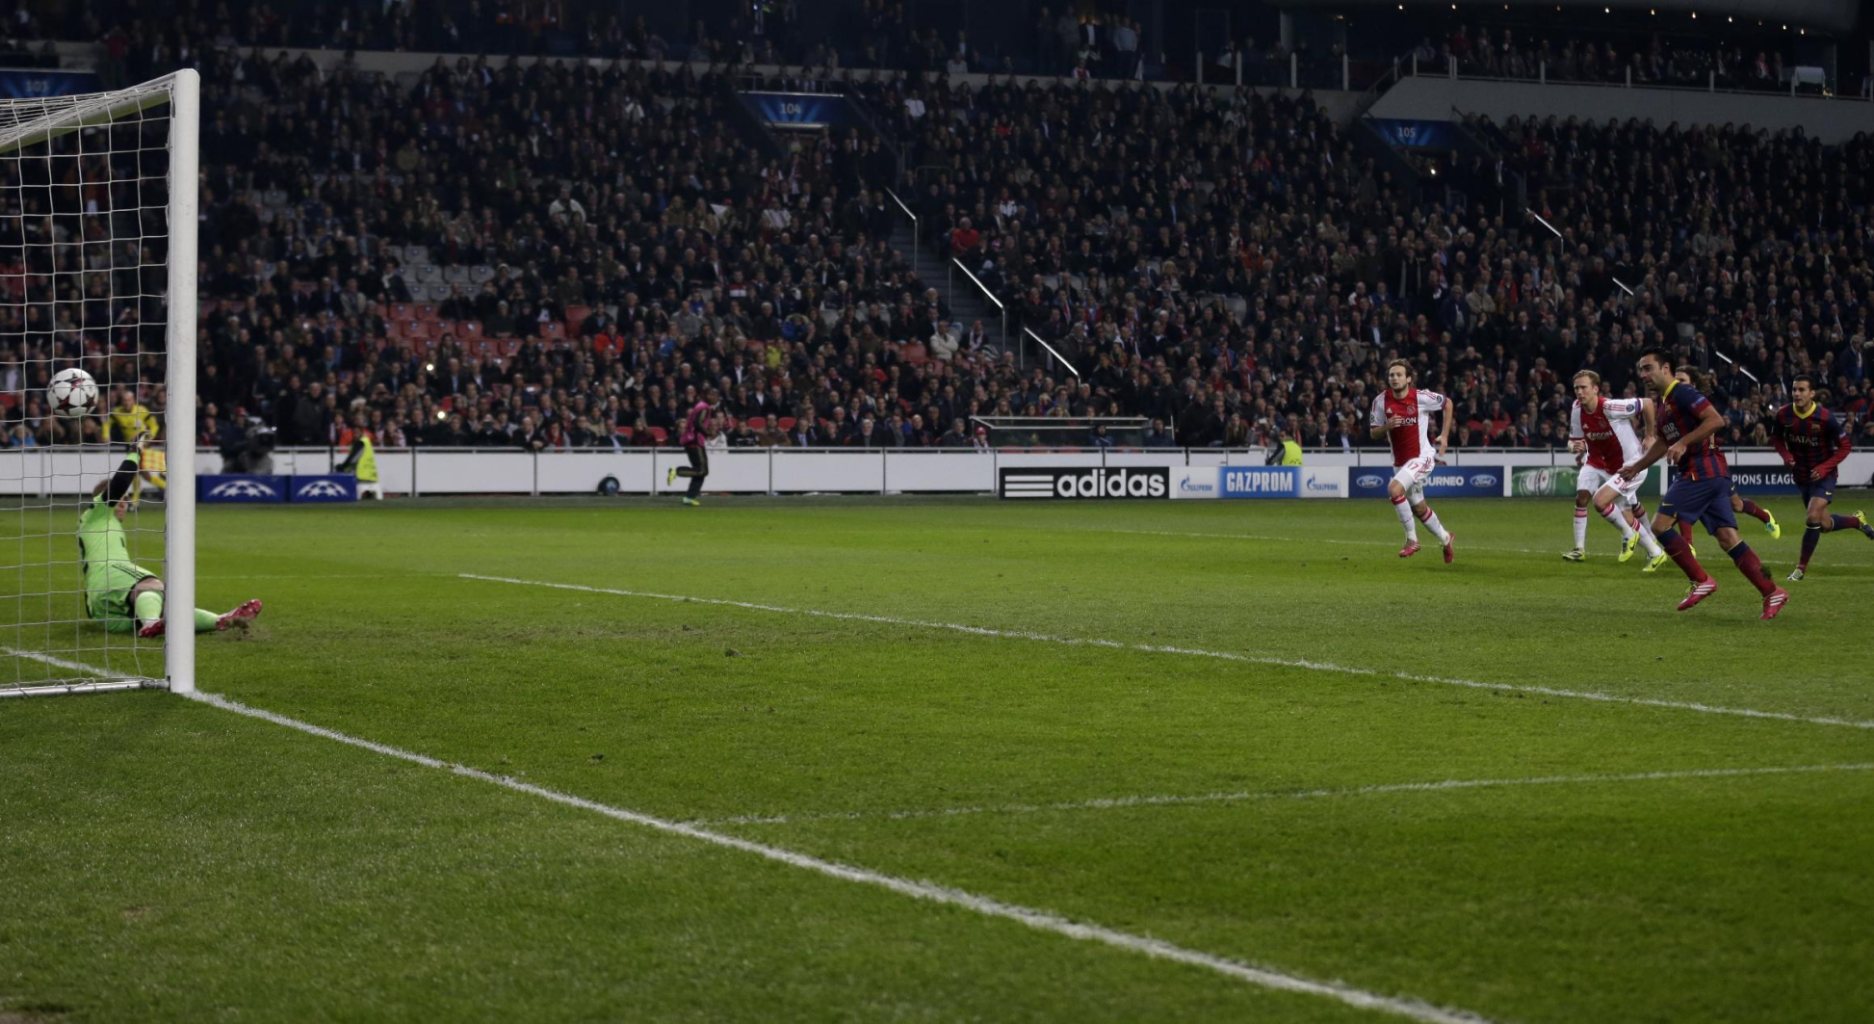 Xavi scoring for Barcelona, in the Champions League, from the penalty-kick spot